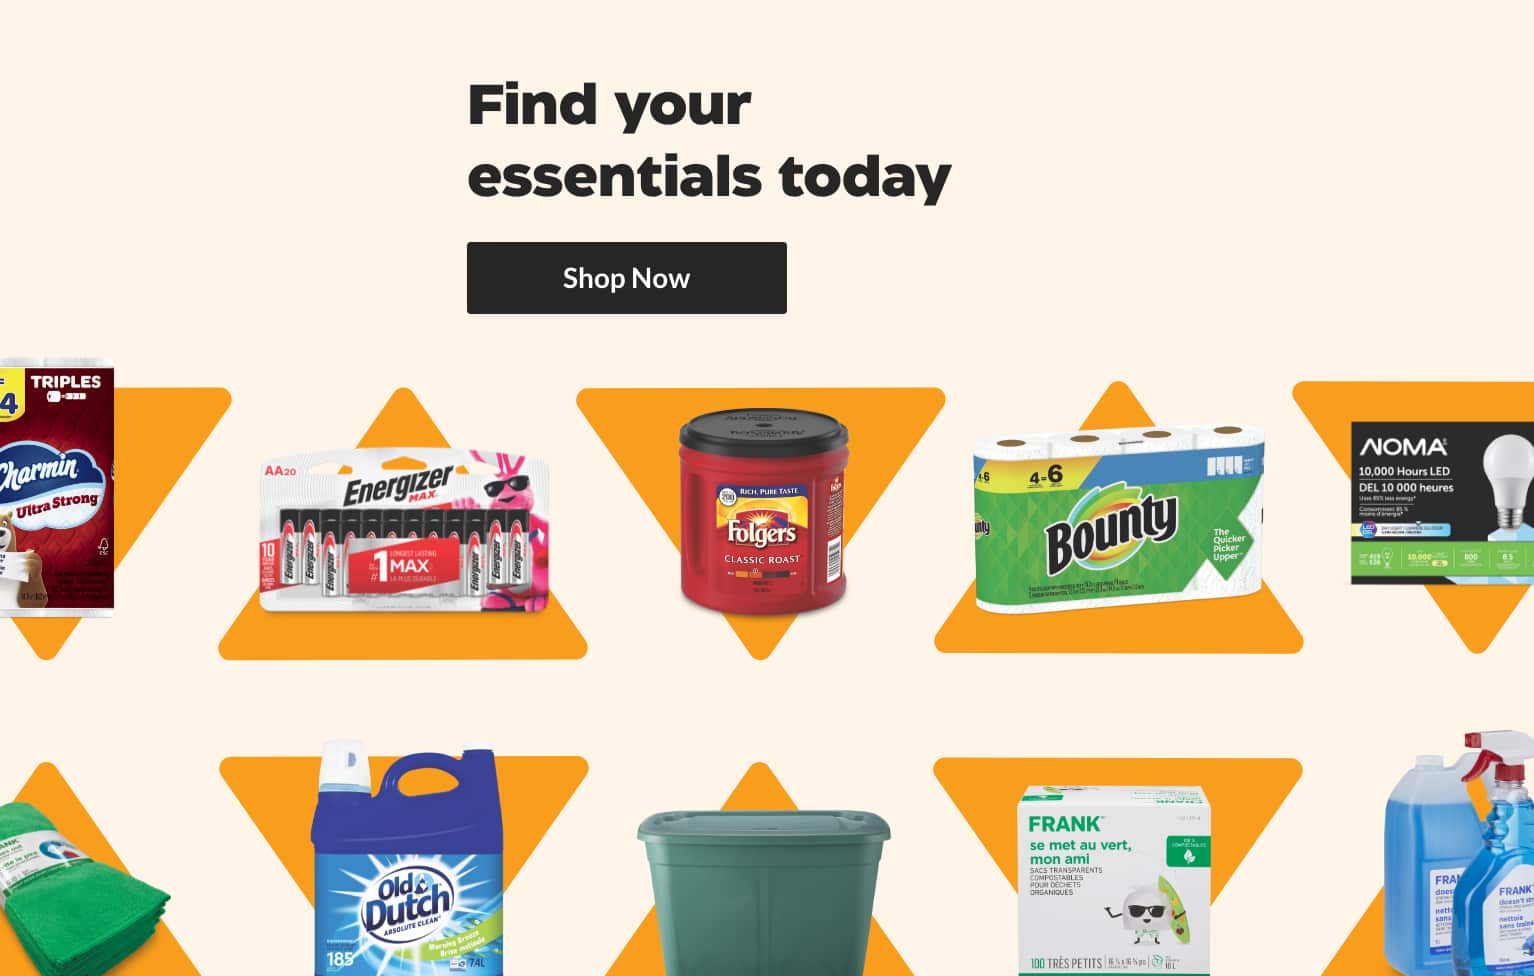 Various household products including Energizer batteries, Bounty paper towels and more around a “Find your essentials today